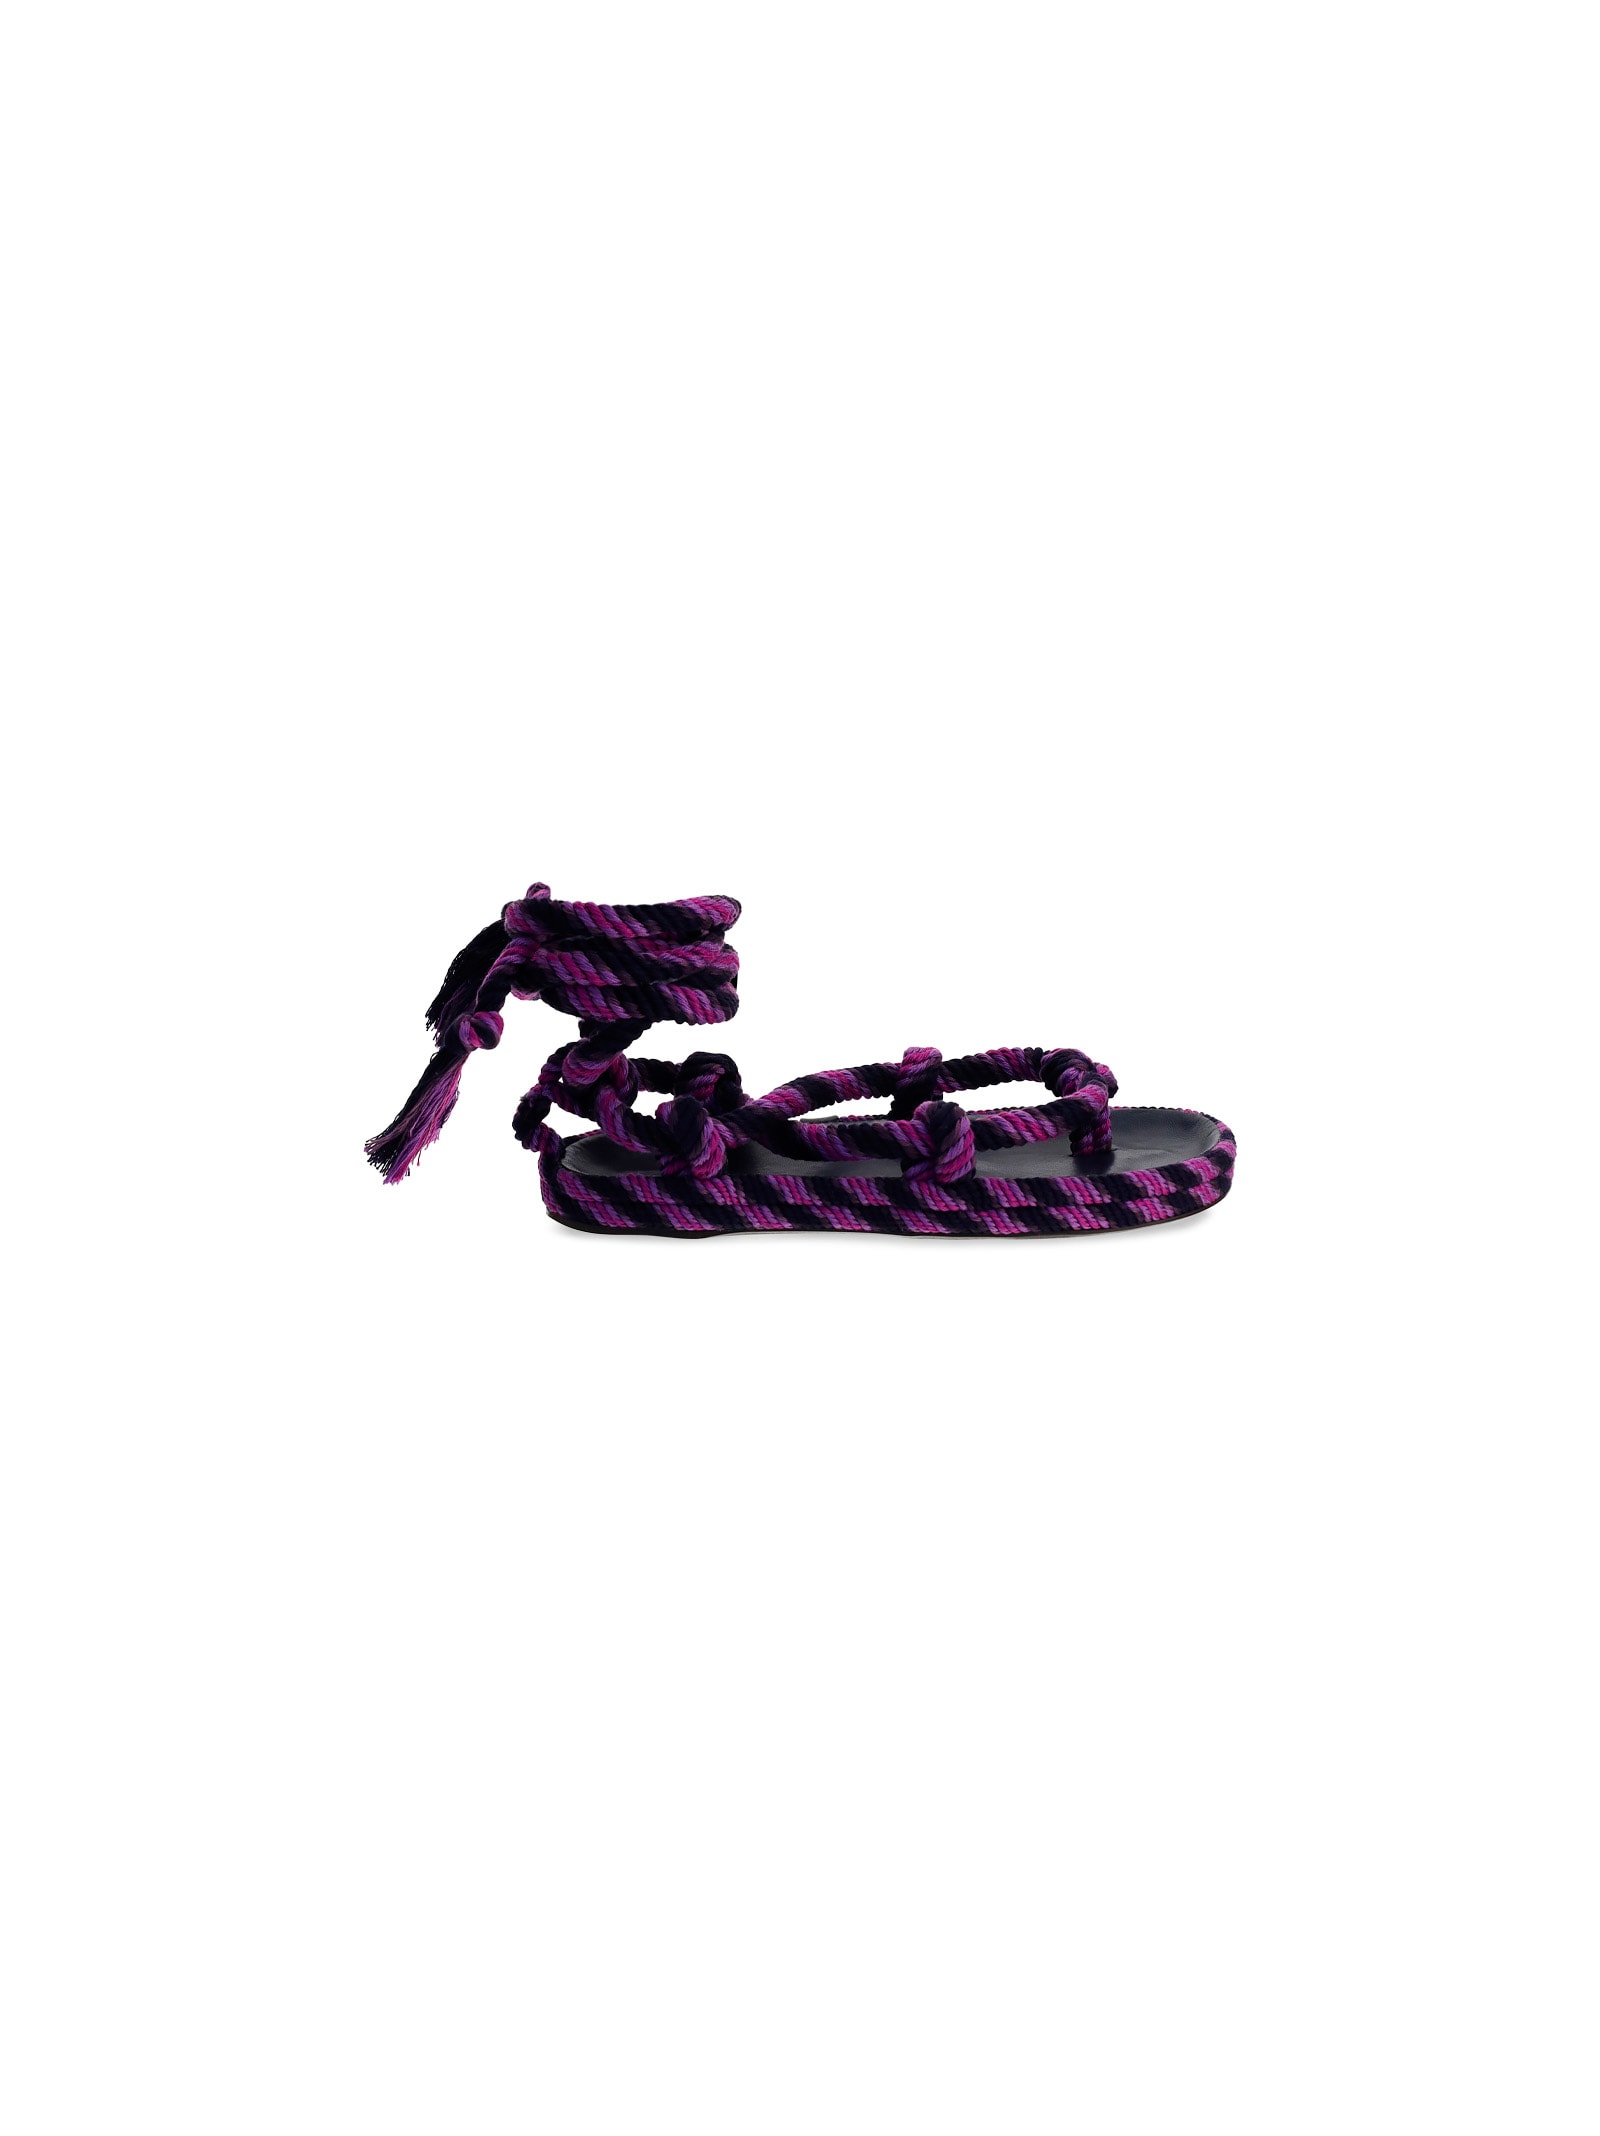 Buy Isabel Marant Erol Sandals online, shop Isabel Marant shoes with free shipping